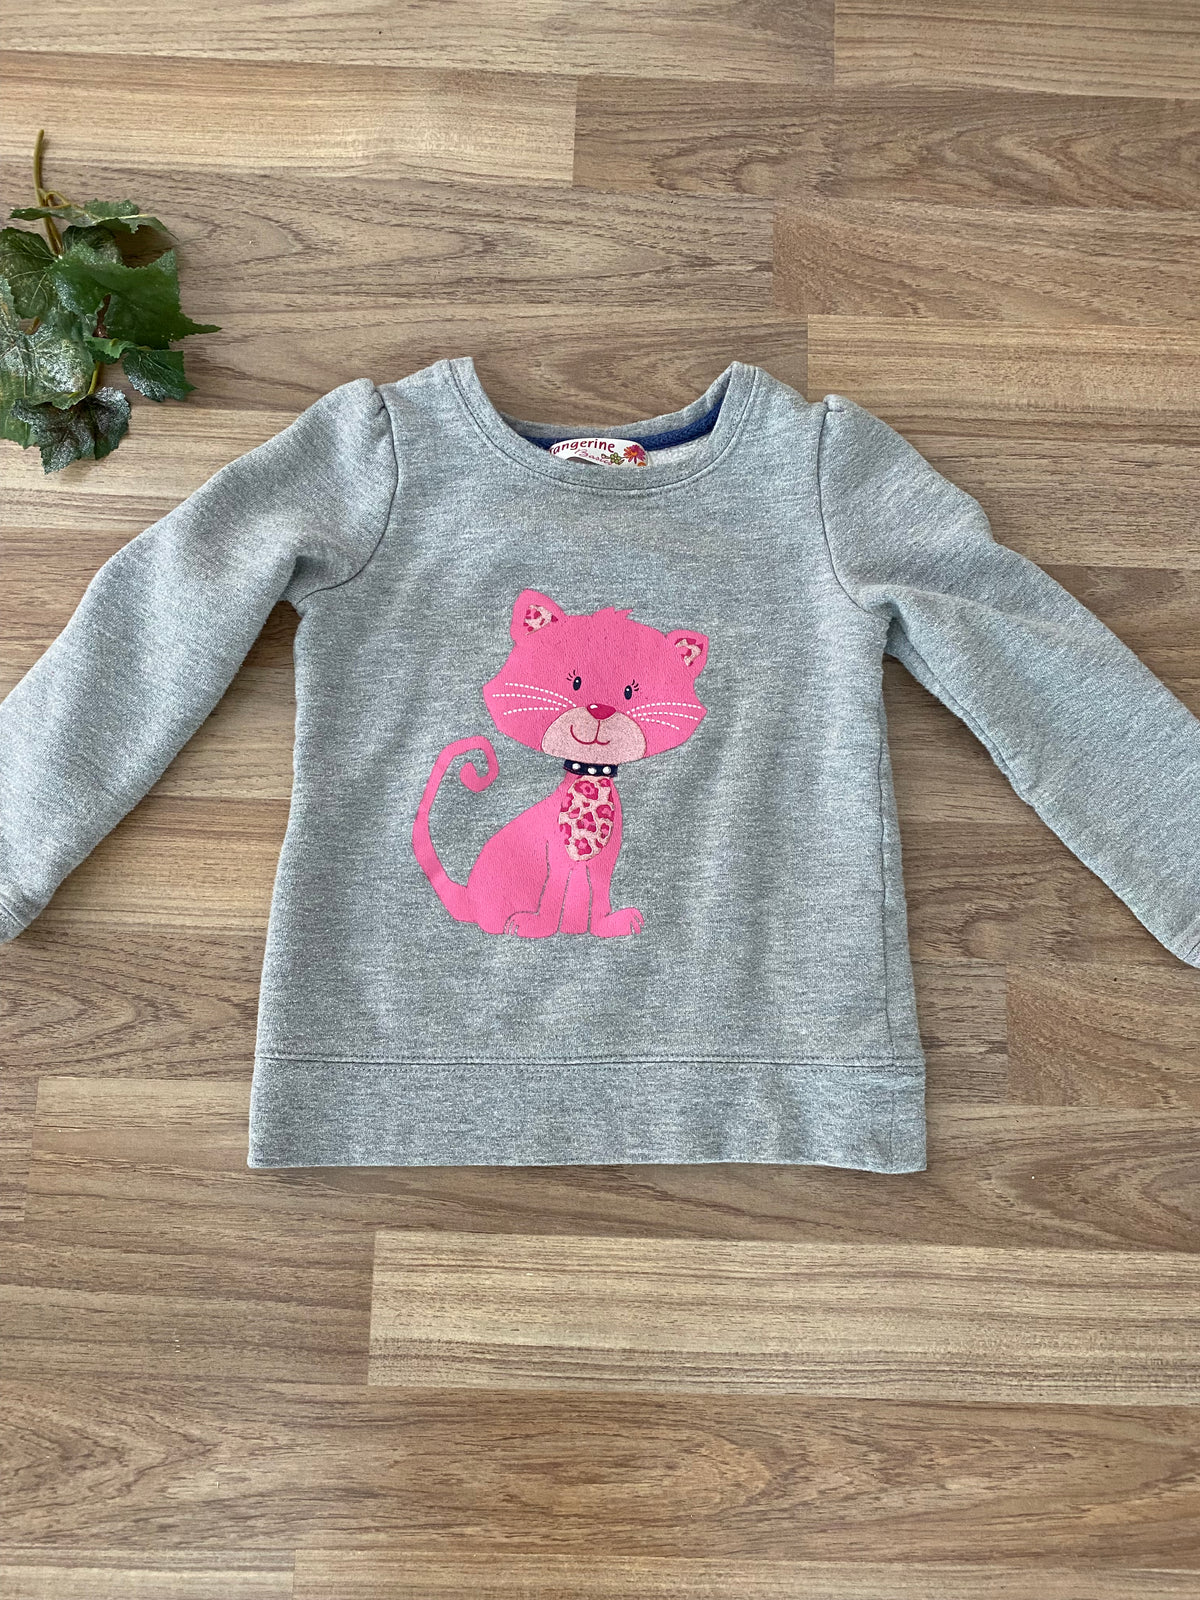 Graphic Sweater (Girls Size 3)